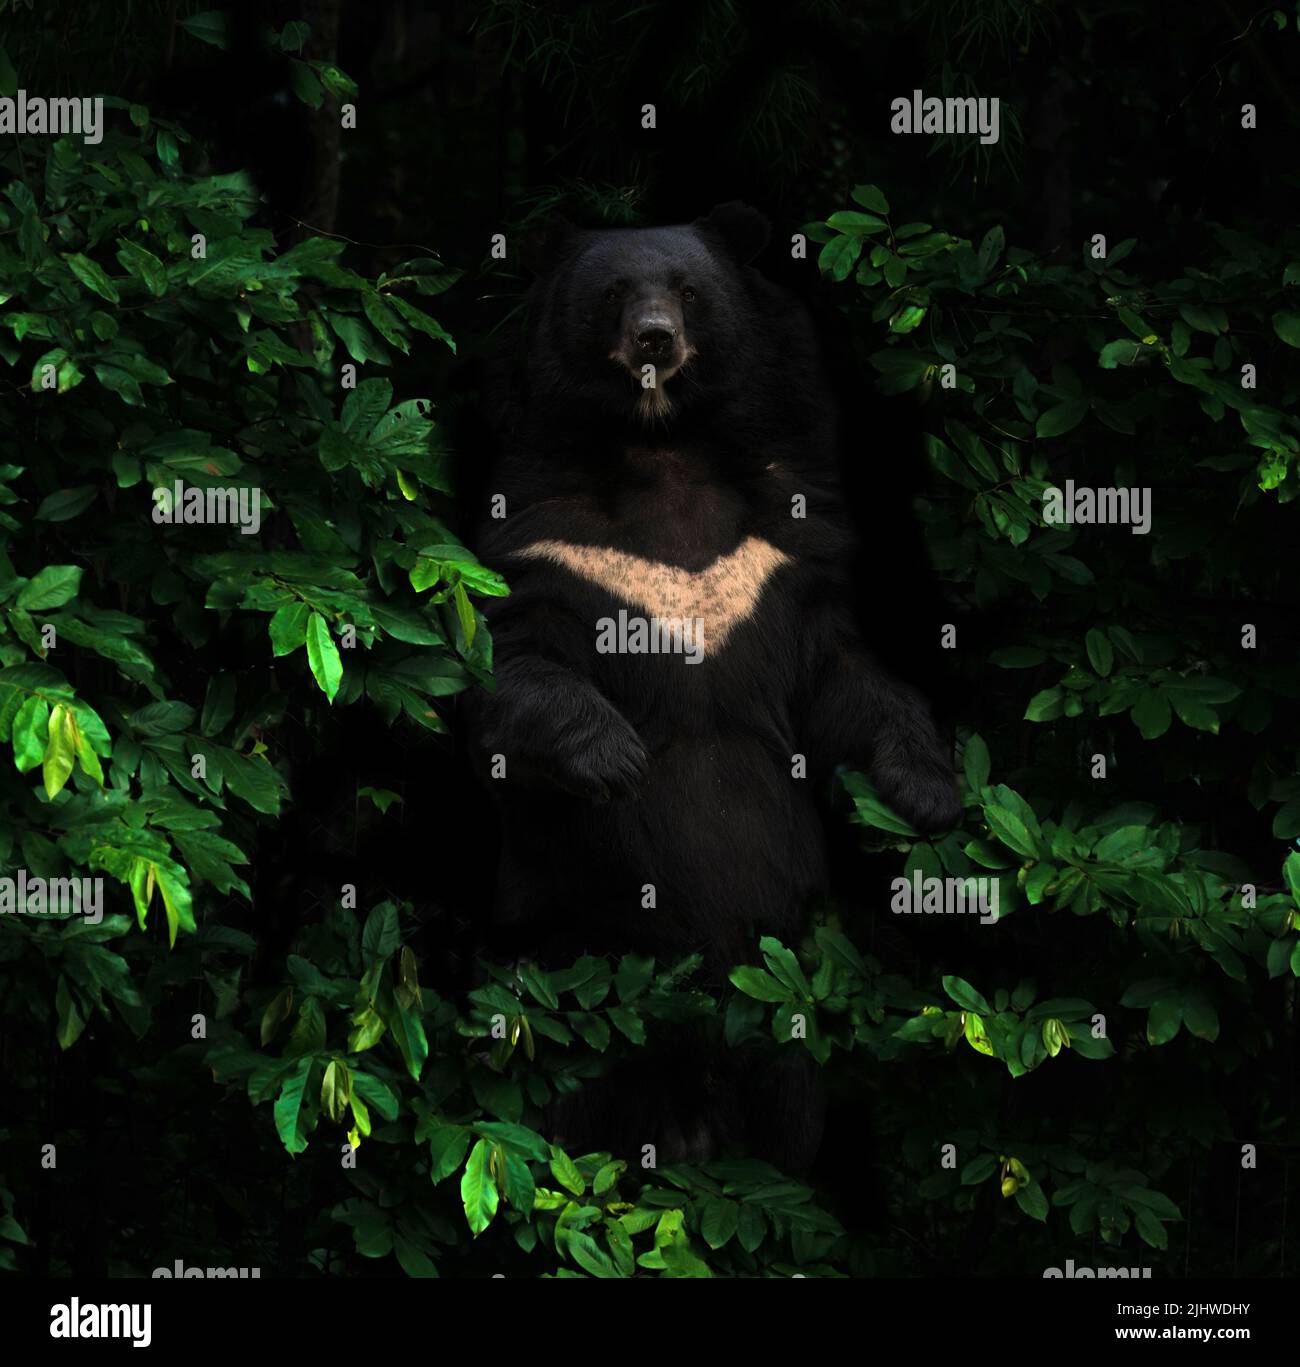 asiatic black bear standing in the dark tropical forest Stock Photo